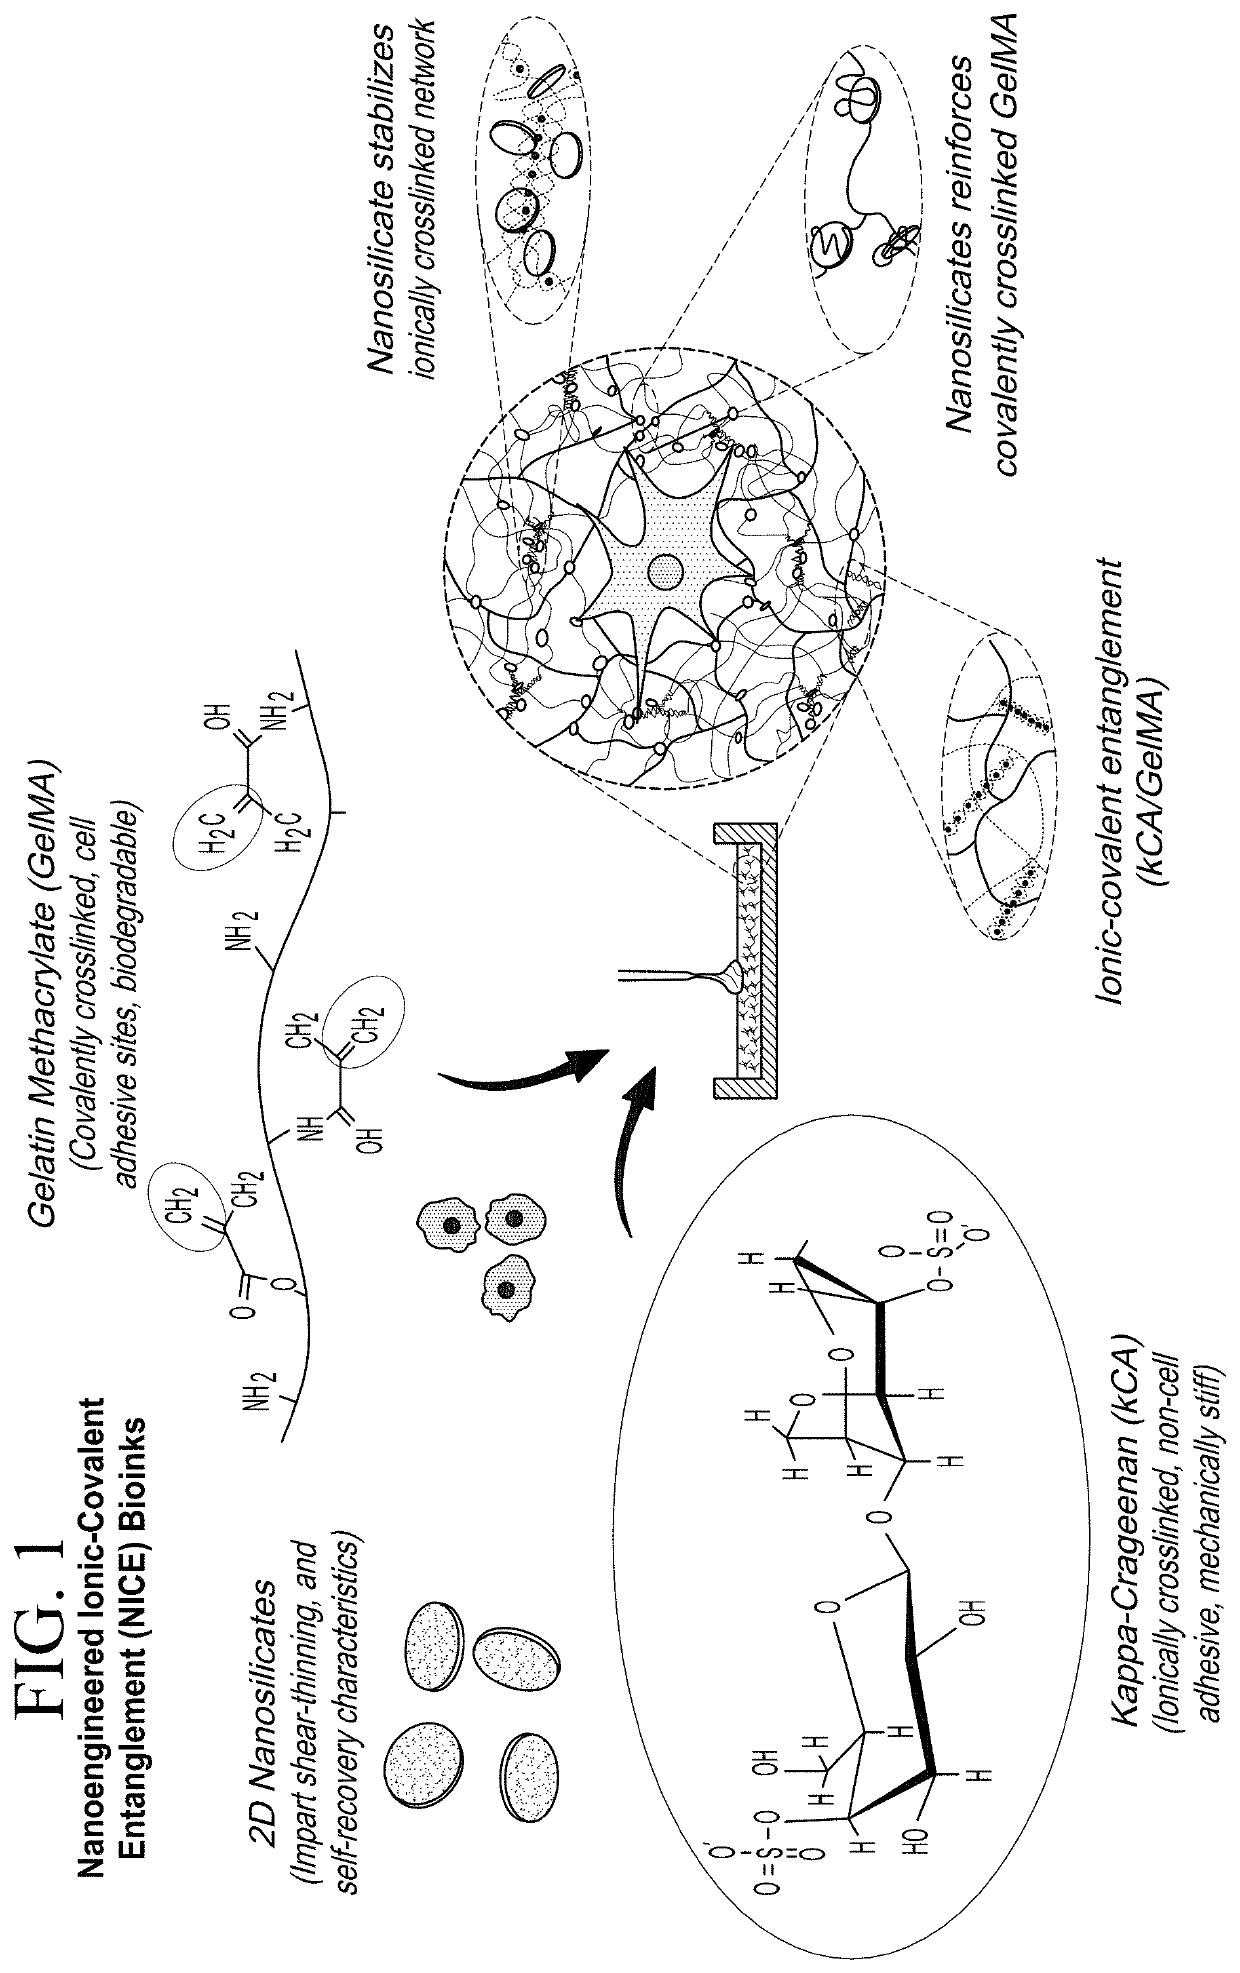 Nanocomposite Ionic-Covalent Entanglement Reinforcement Mechanism and Hydrogel